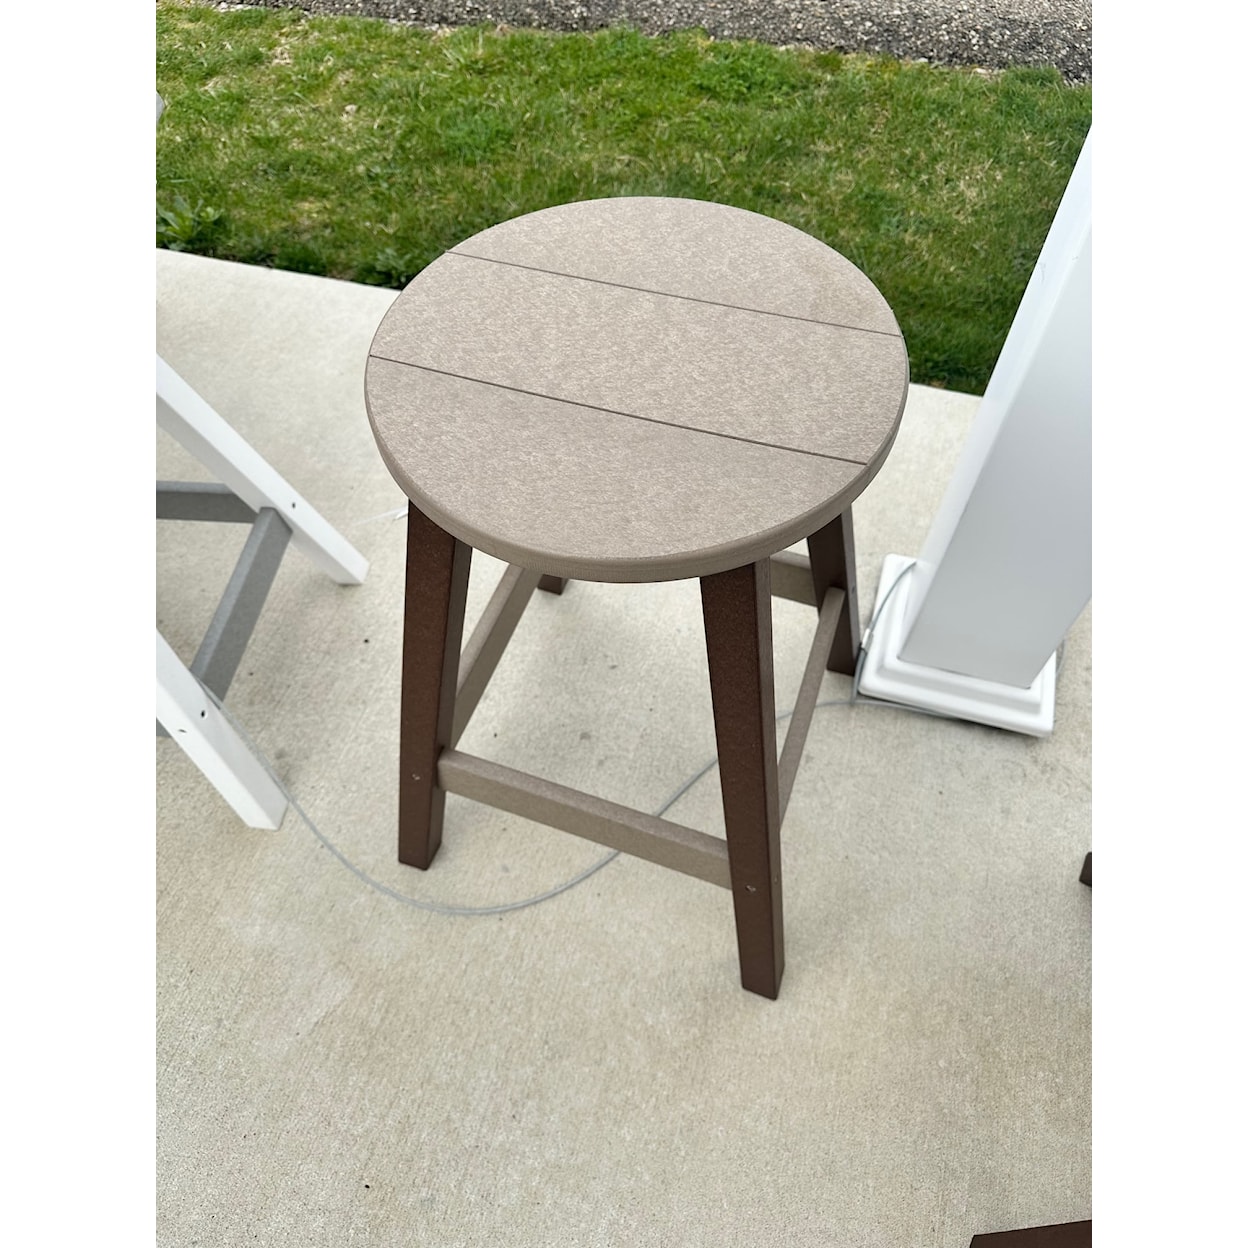 Hoosier Poly Products Barstools and Benches Outdoor Bar Stool